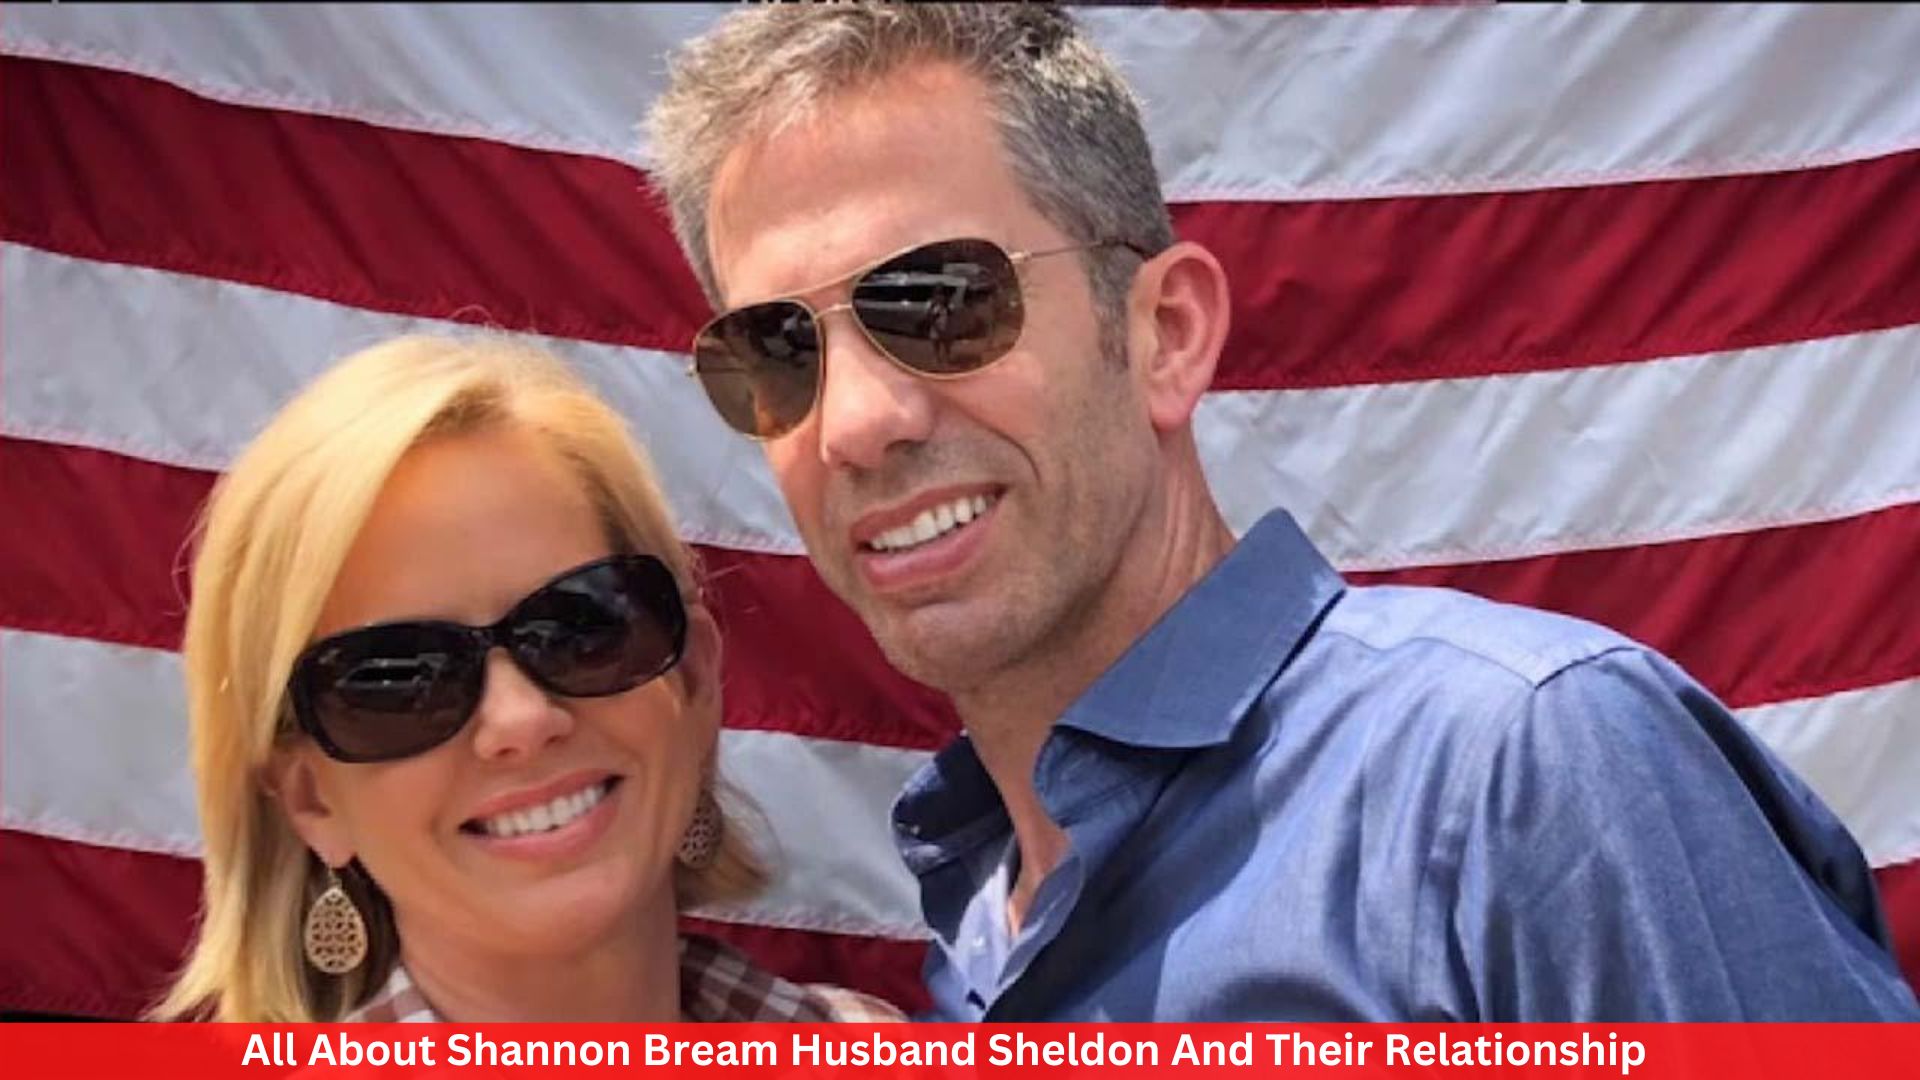 All About Shannon Bream Husband Sheldon And Their Relationship